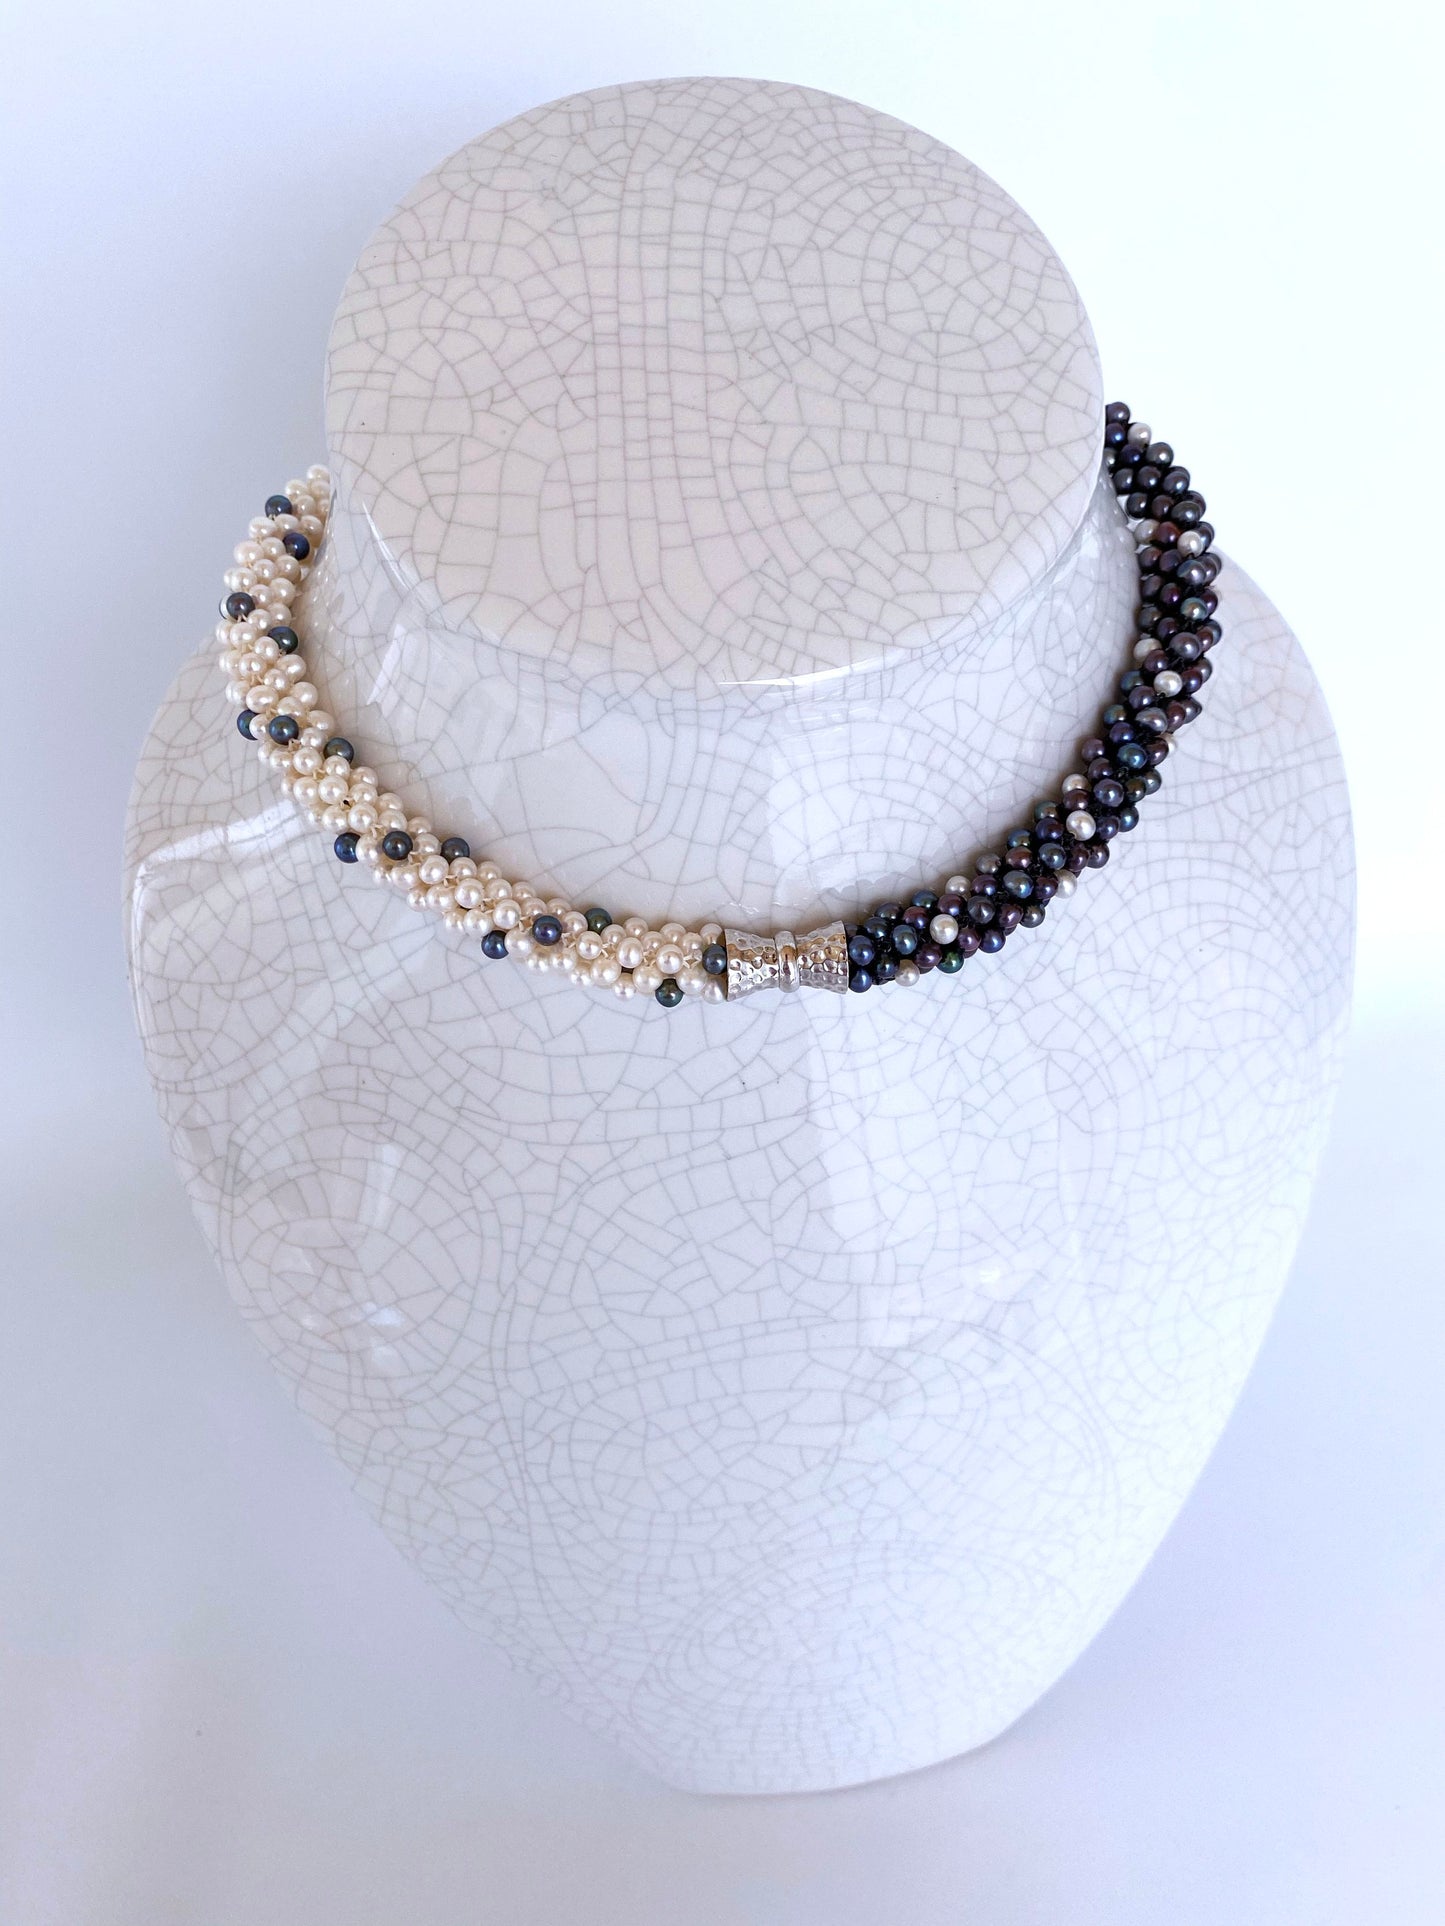 Black & White Pearl Convertible Necklace / Bracelet with Magnetic Clasp